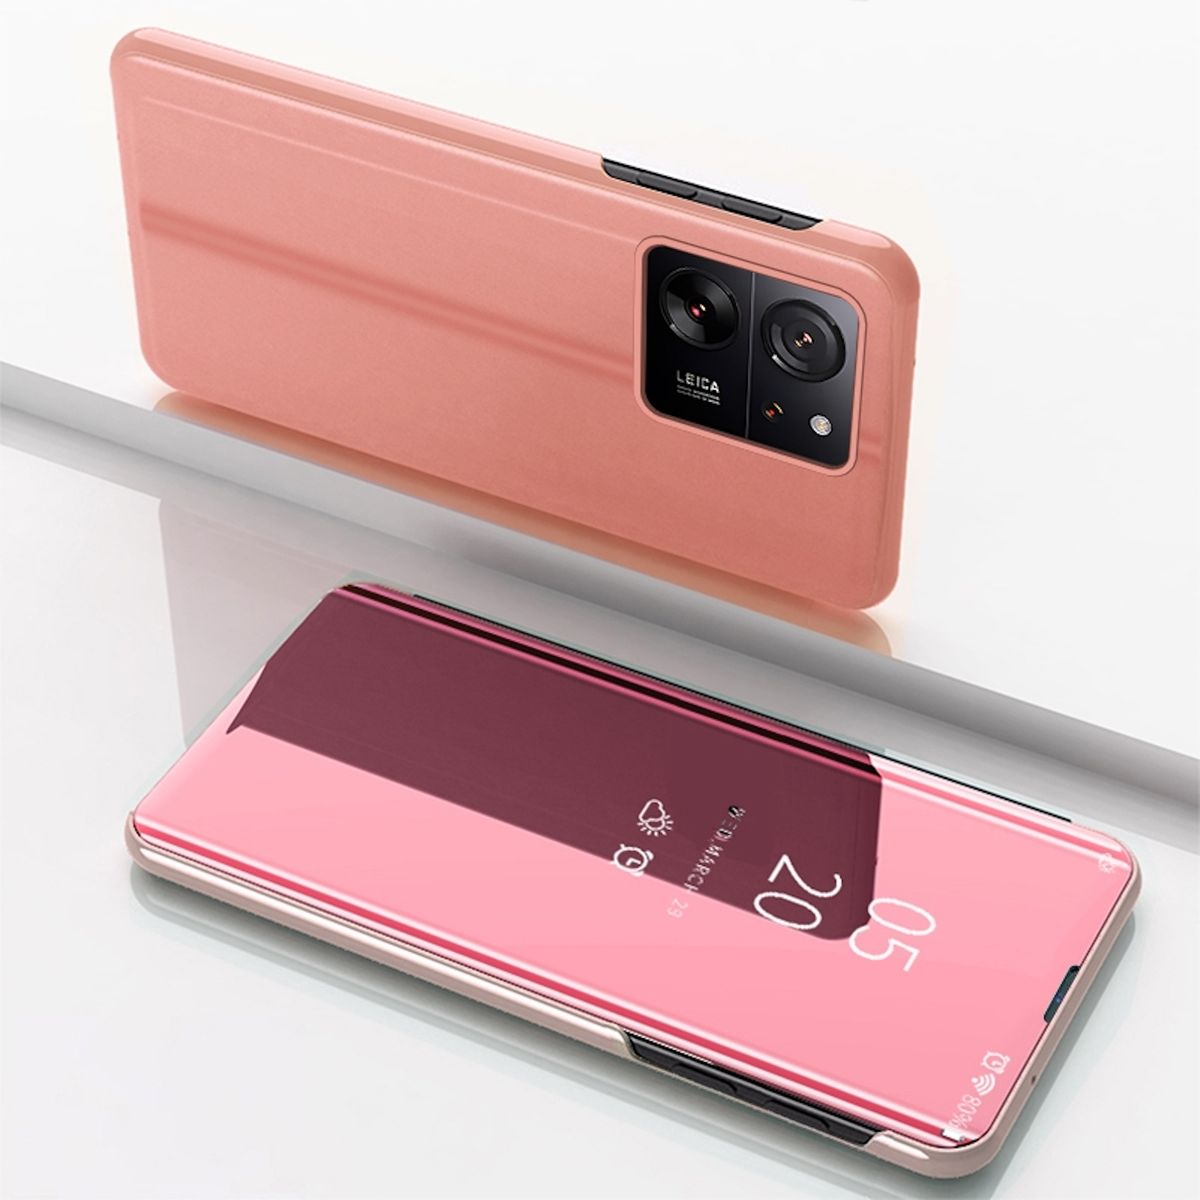 WIGENTO View Smart Spiegel Cover / Mirror 13T Xiaomi, mit 13T Bookcover, Pink Funktion, Wake UP Pro